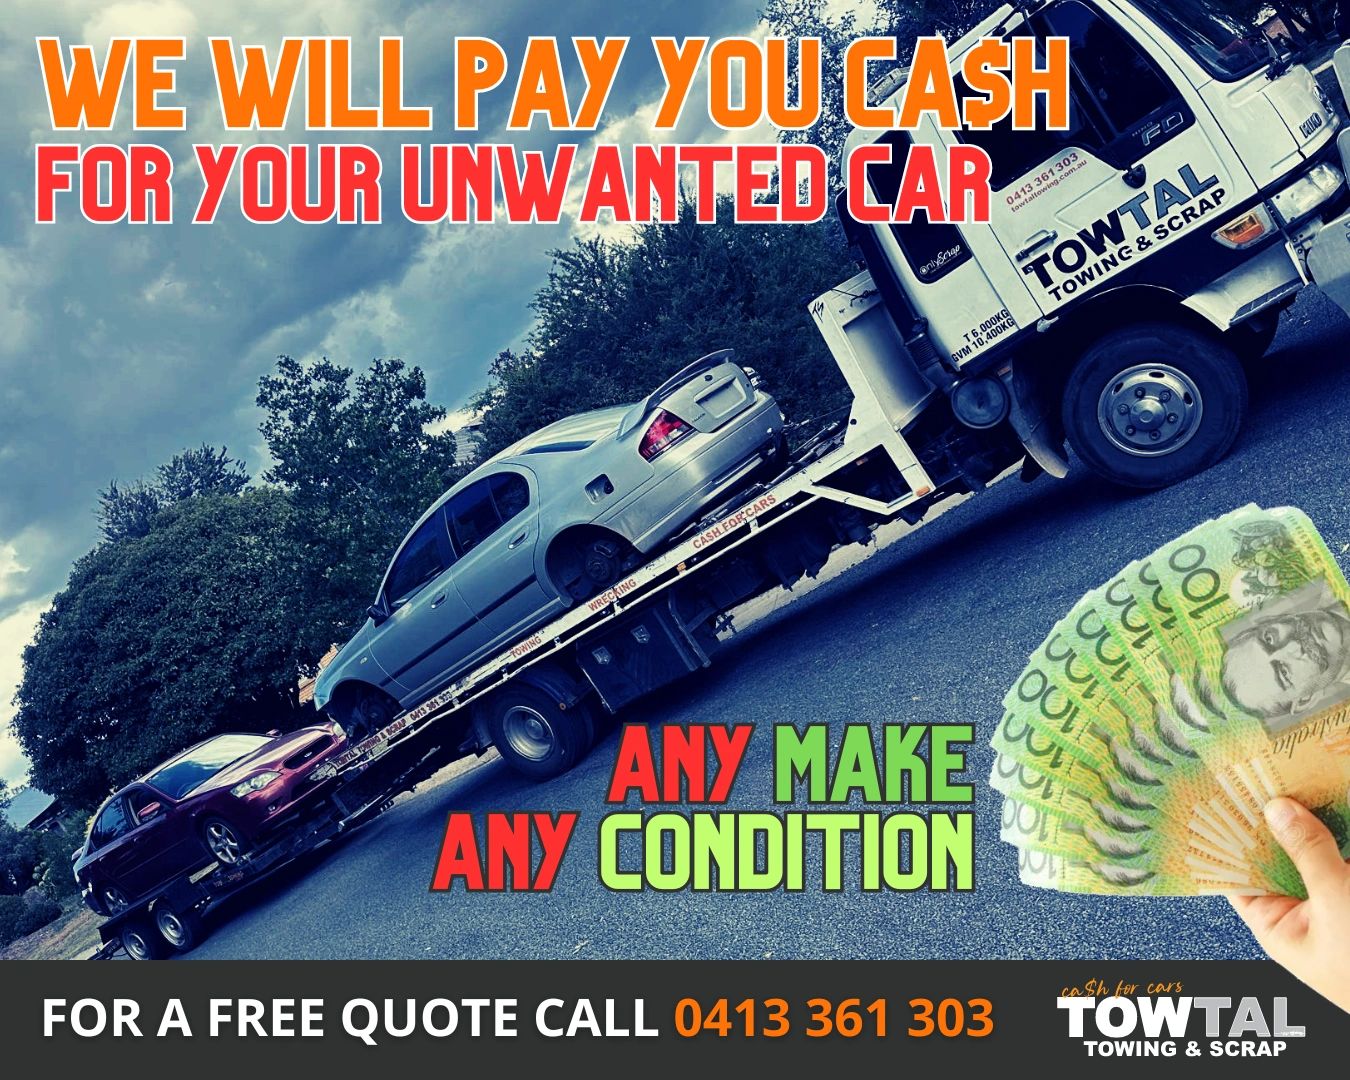 used vehicles on towtruck
cash in hand for client